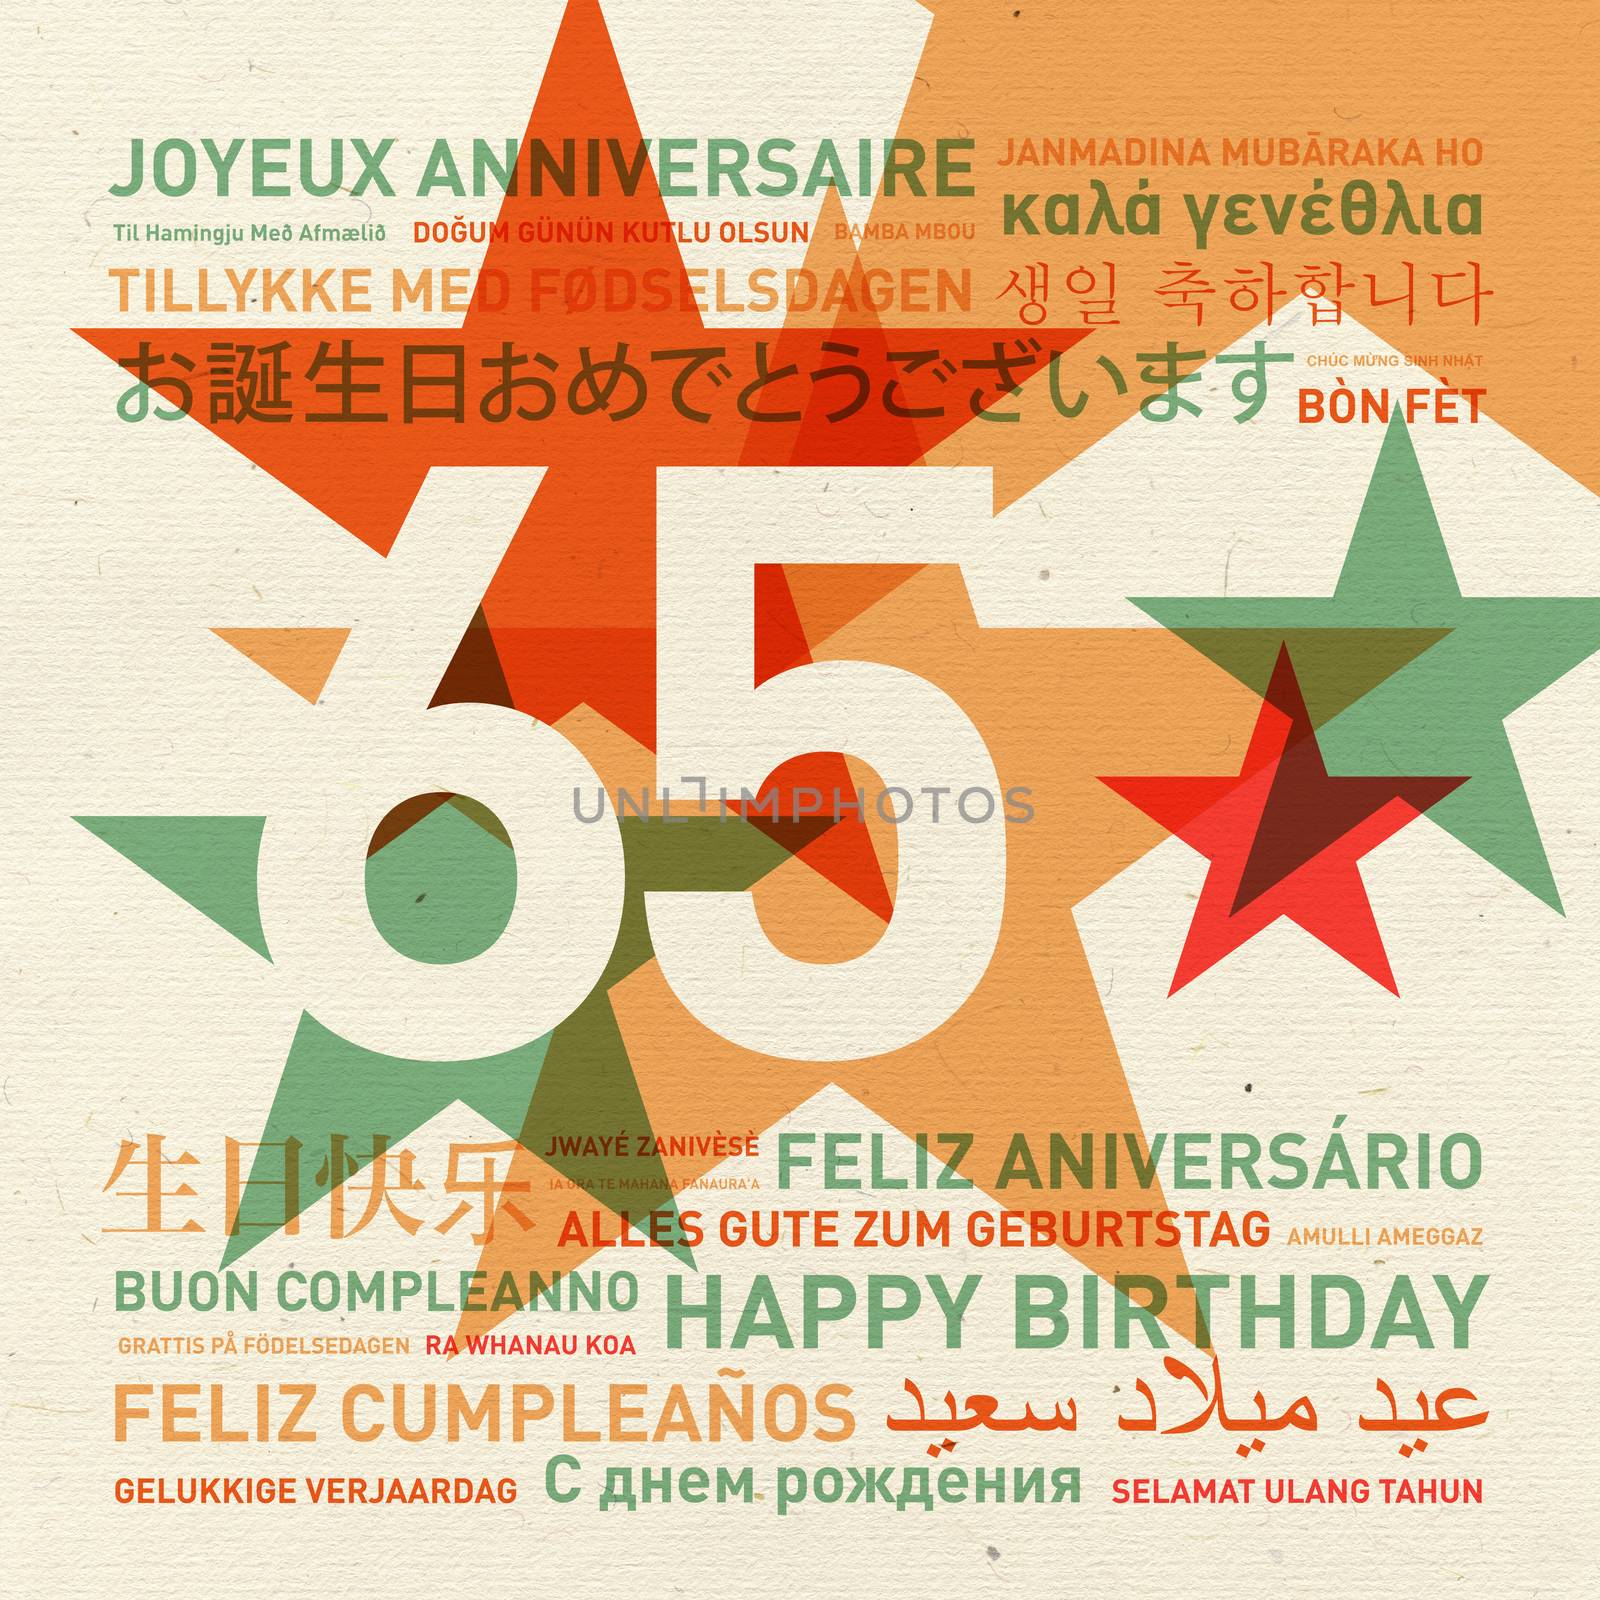 65th anniversary happy birthday from the world. Different languages celebration card